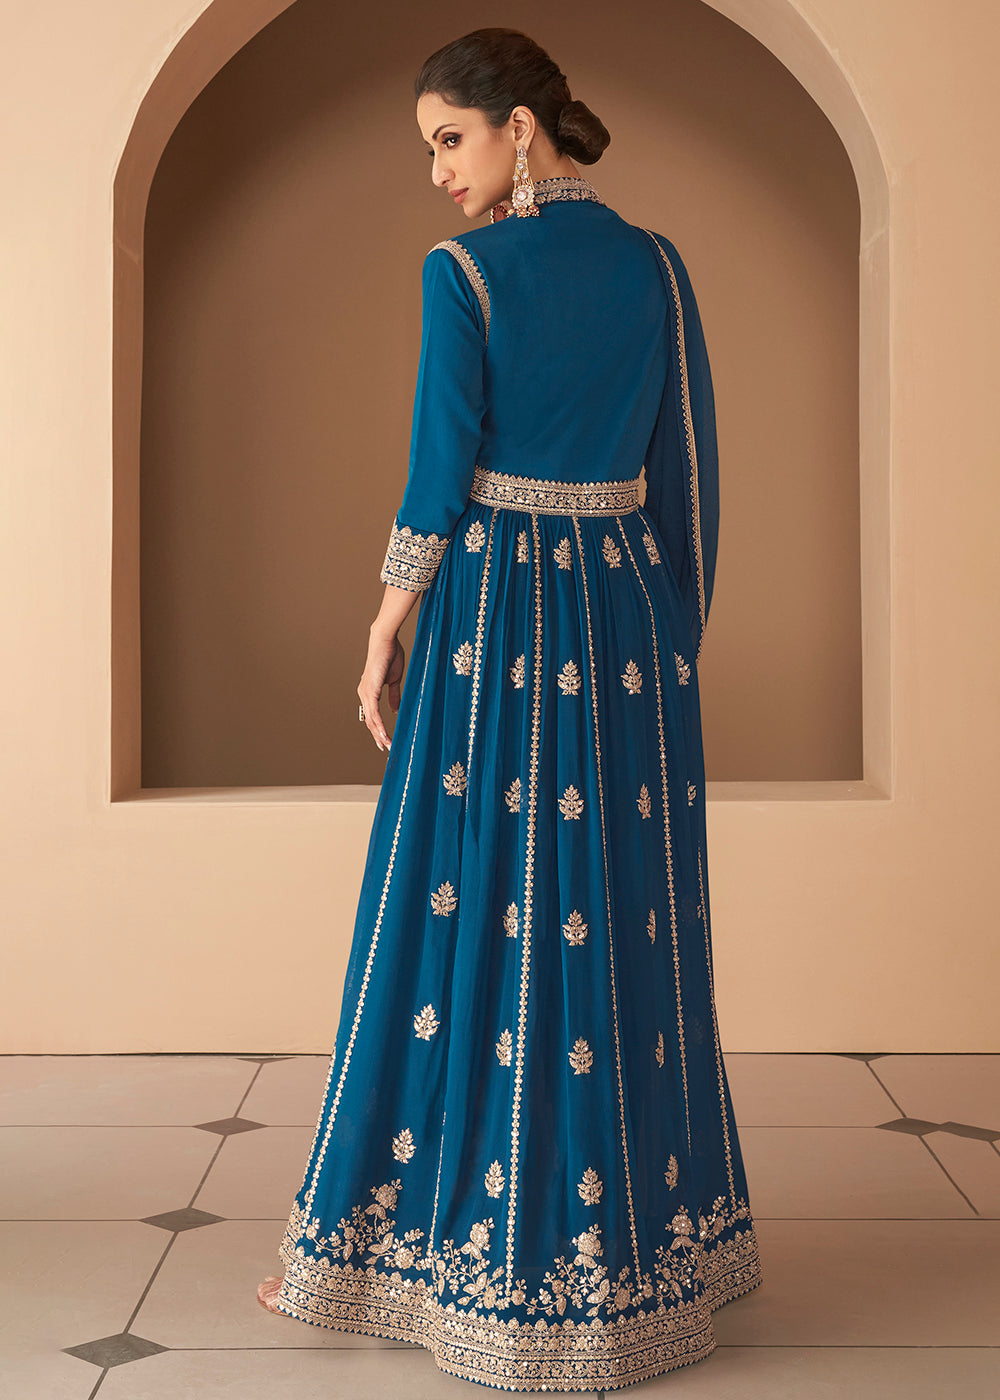 Buy Now Glorious Blue Front Slit Silk Georgette Anarkali Suit Online in USA, UK, Australia, New Zealand, Canada, Italy & Worldwide at Empress Clothing. 